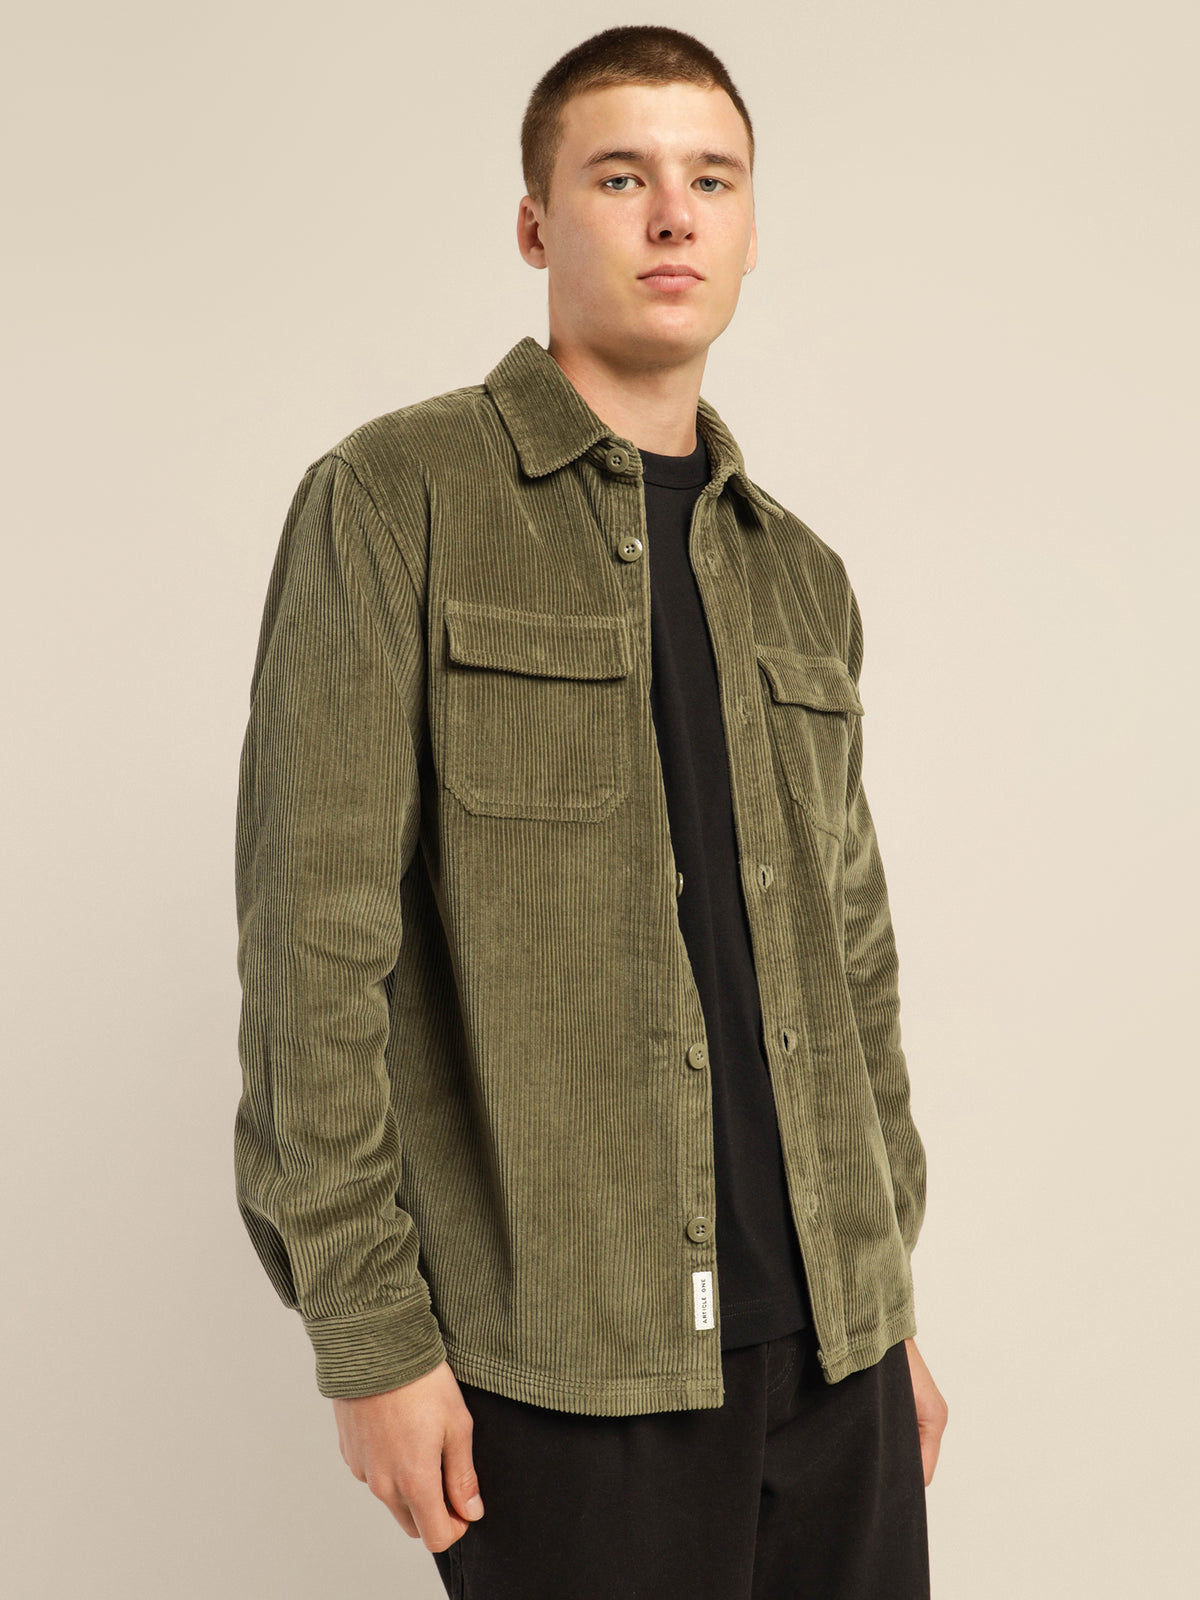 Oakes Cord Overshirt in Flint Green